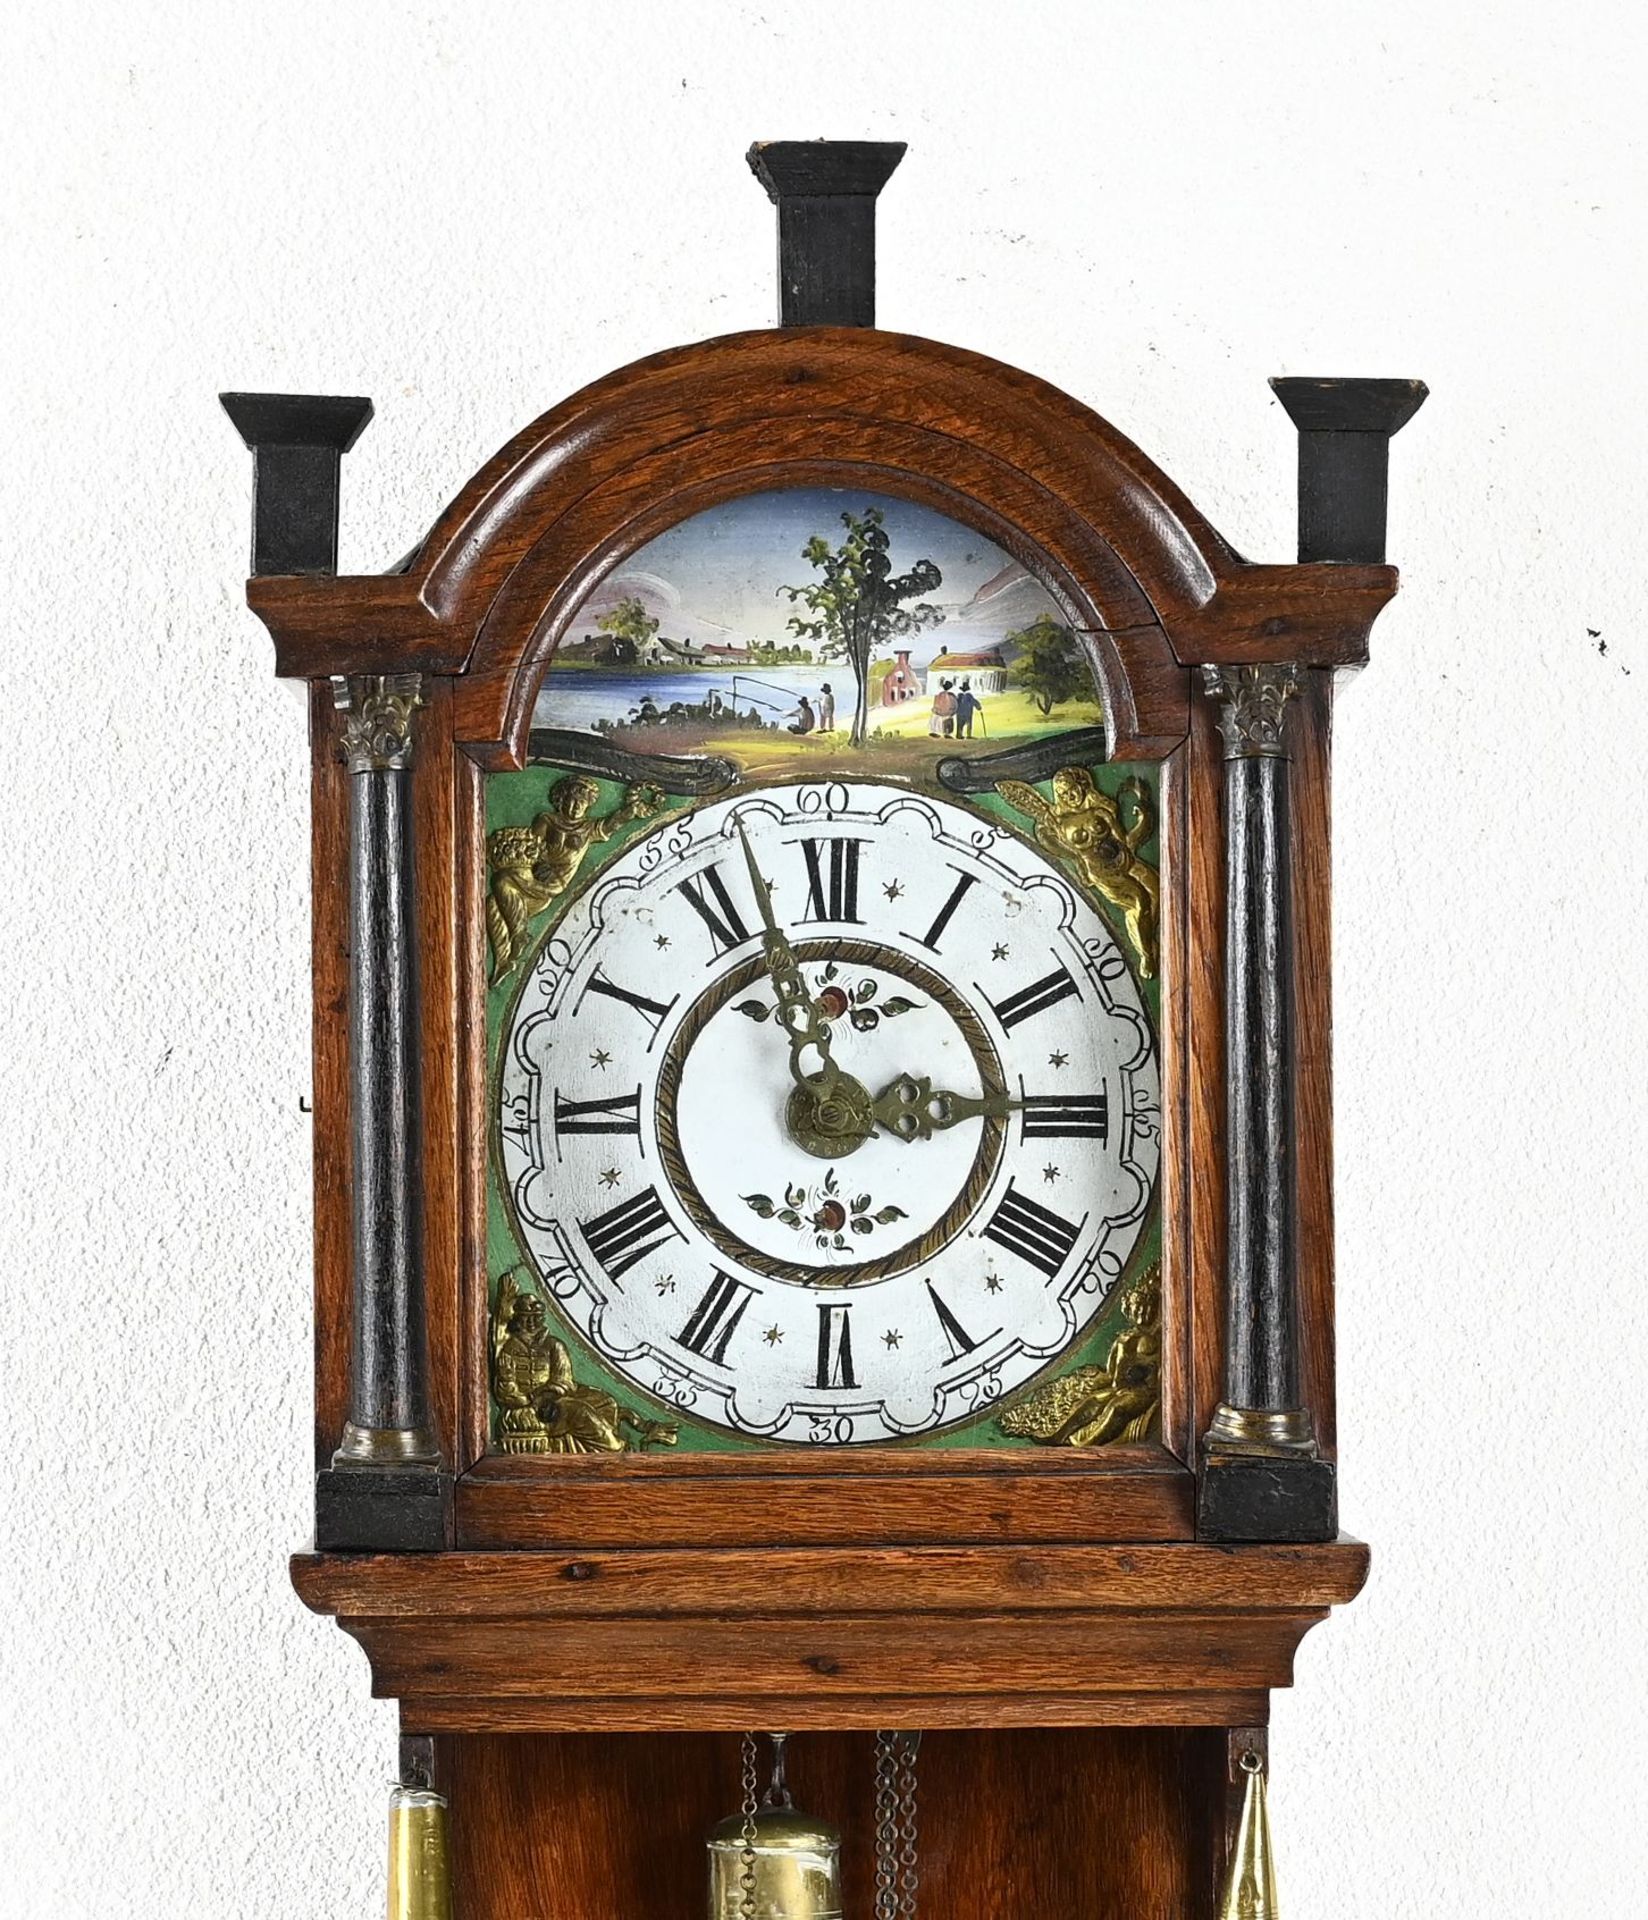 Notary clock - Image 2 of 2